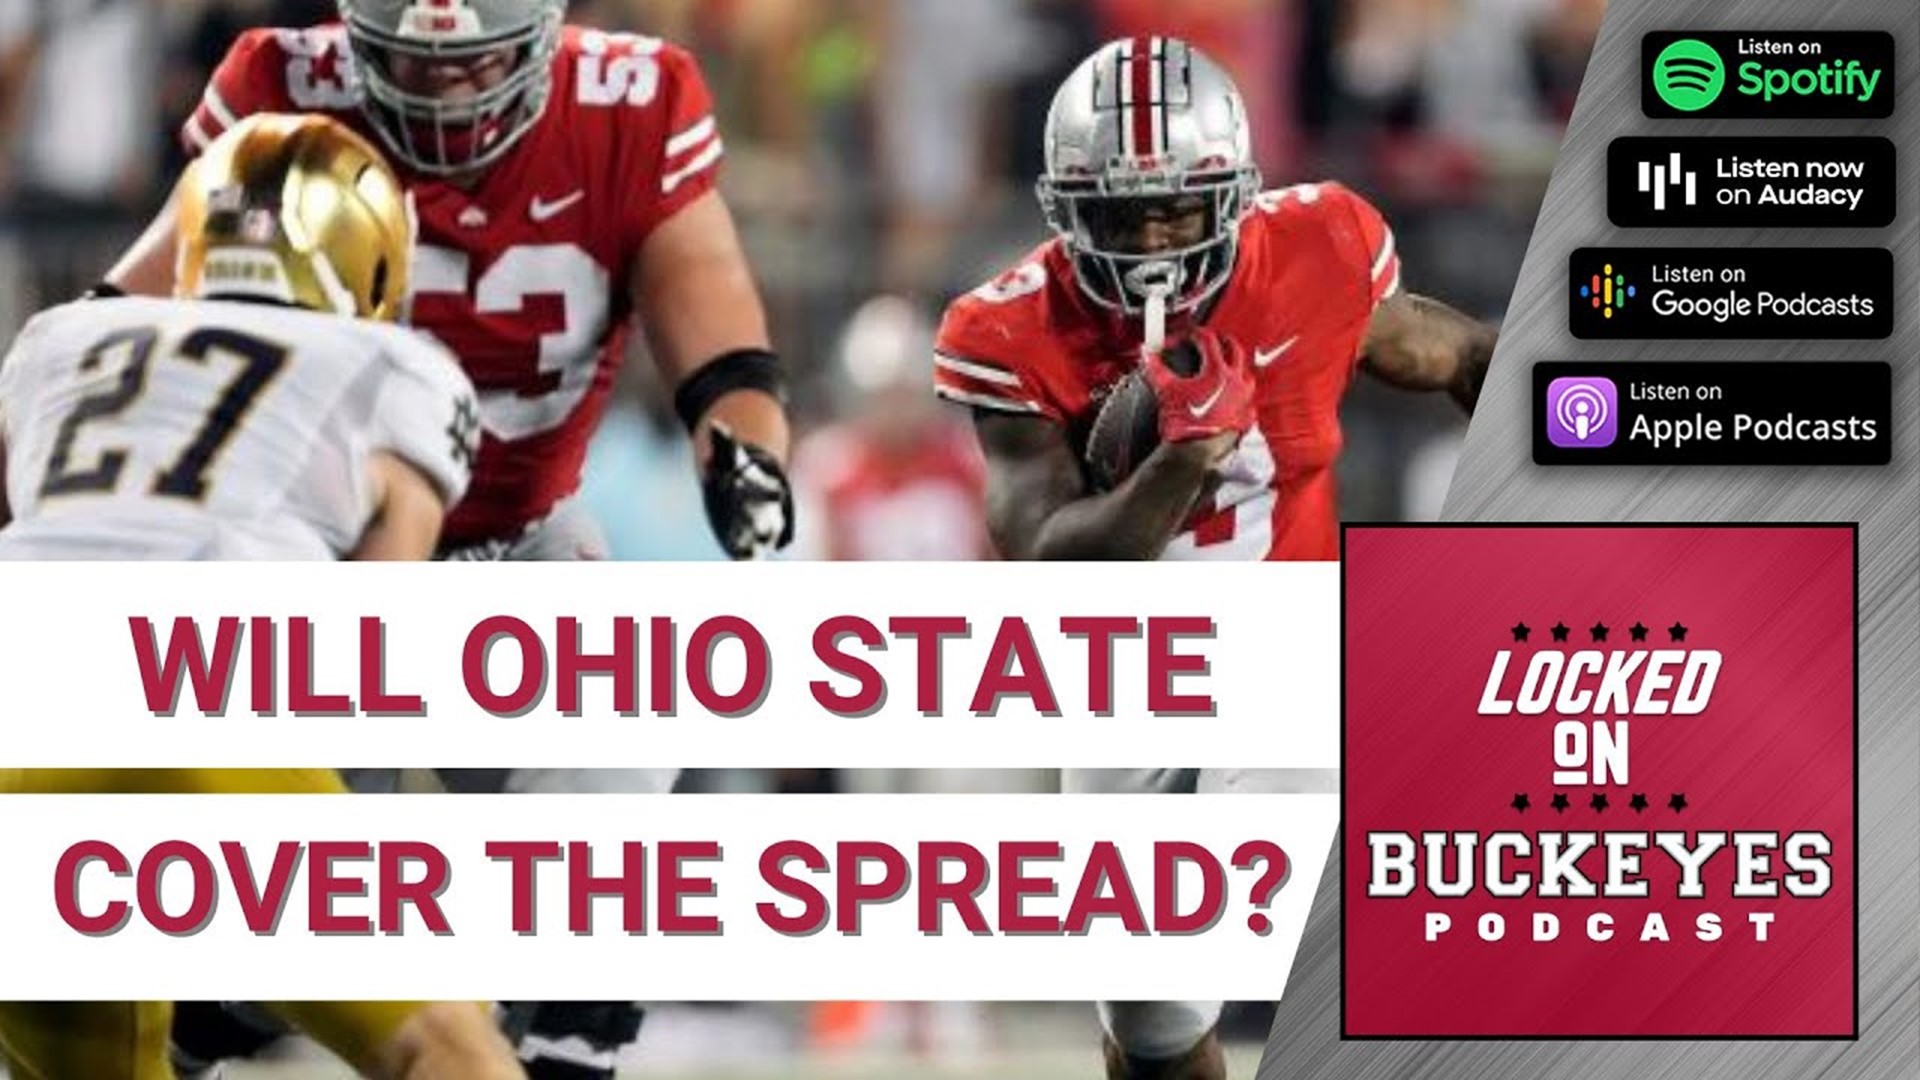 Here’s everything you need to know before this weekend’s Ohio State game as the Buckeyes battle the Rutgers Scarlet Knights.